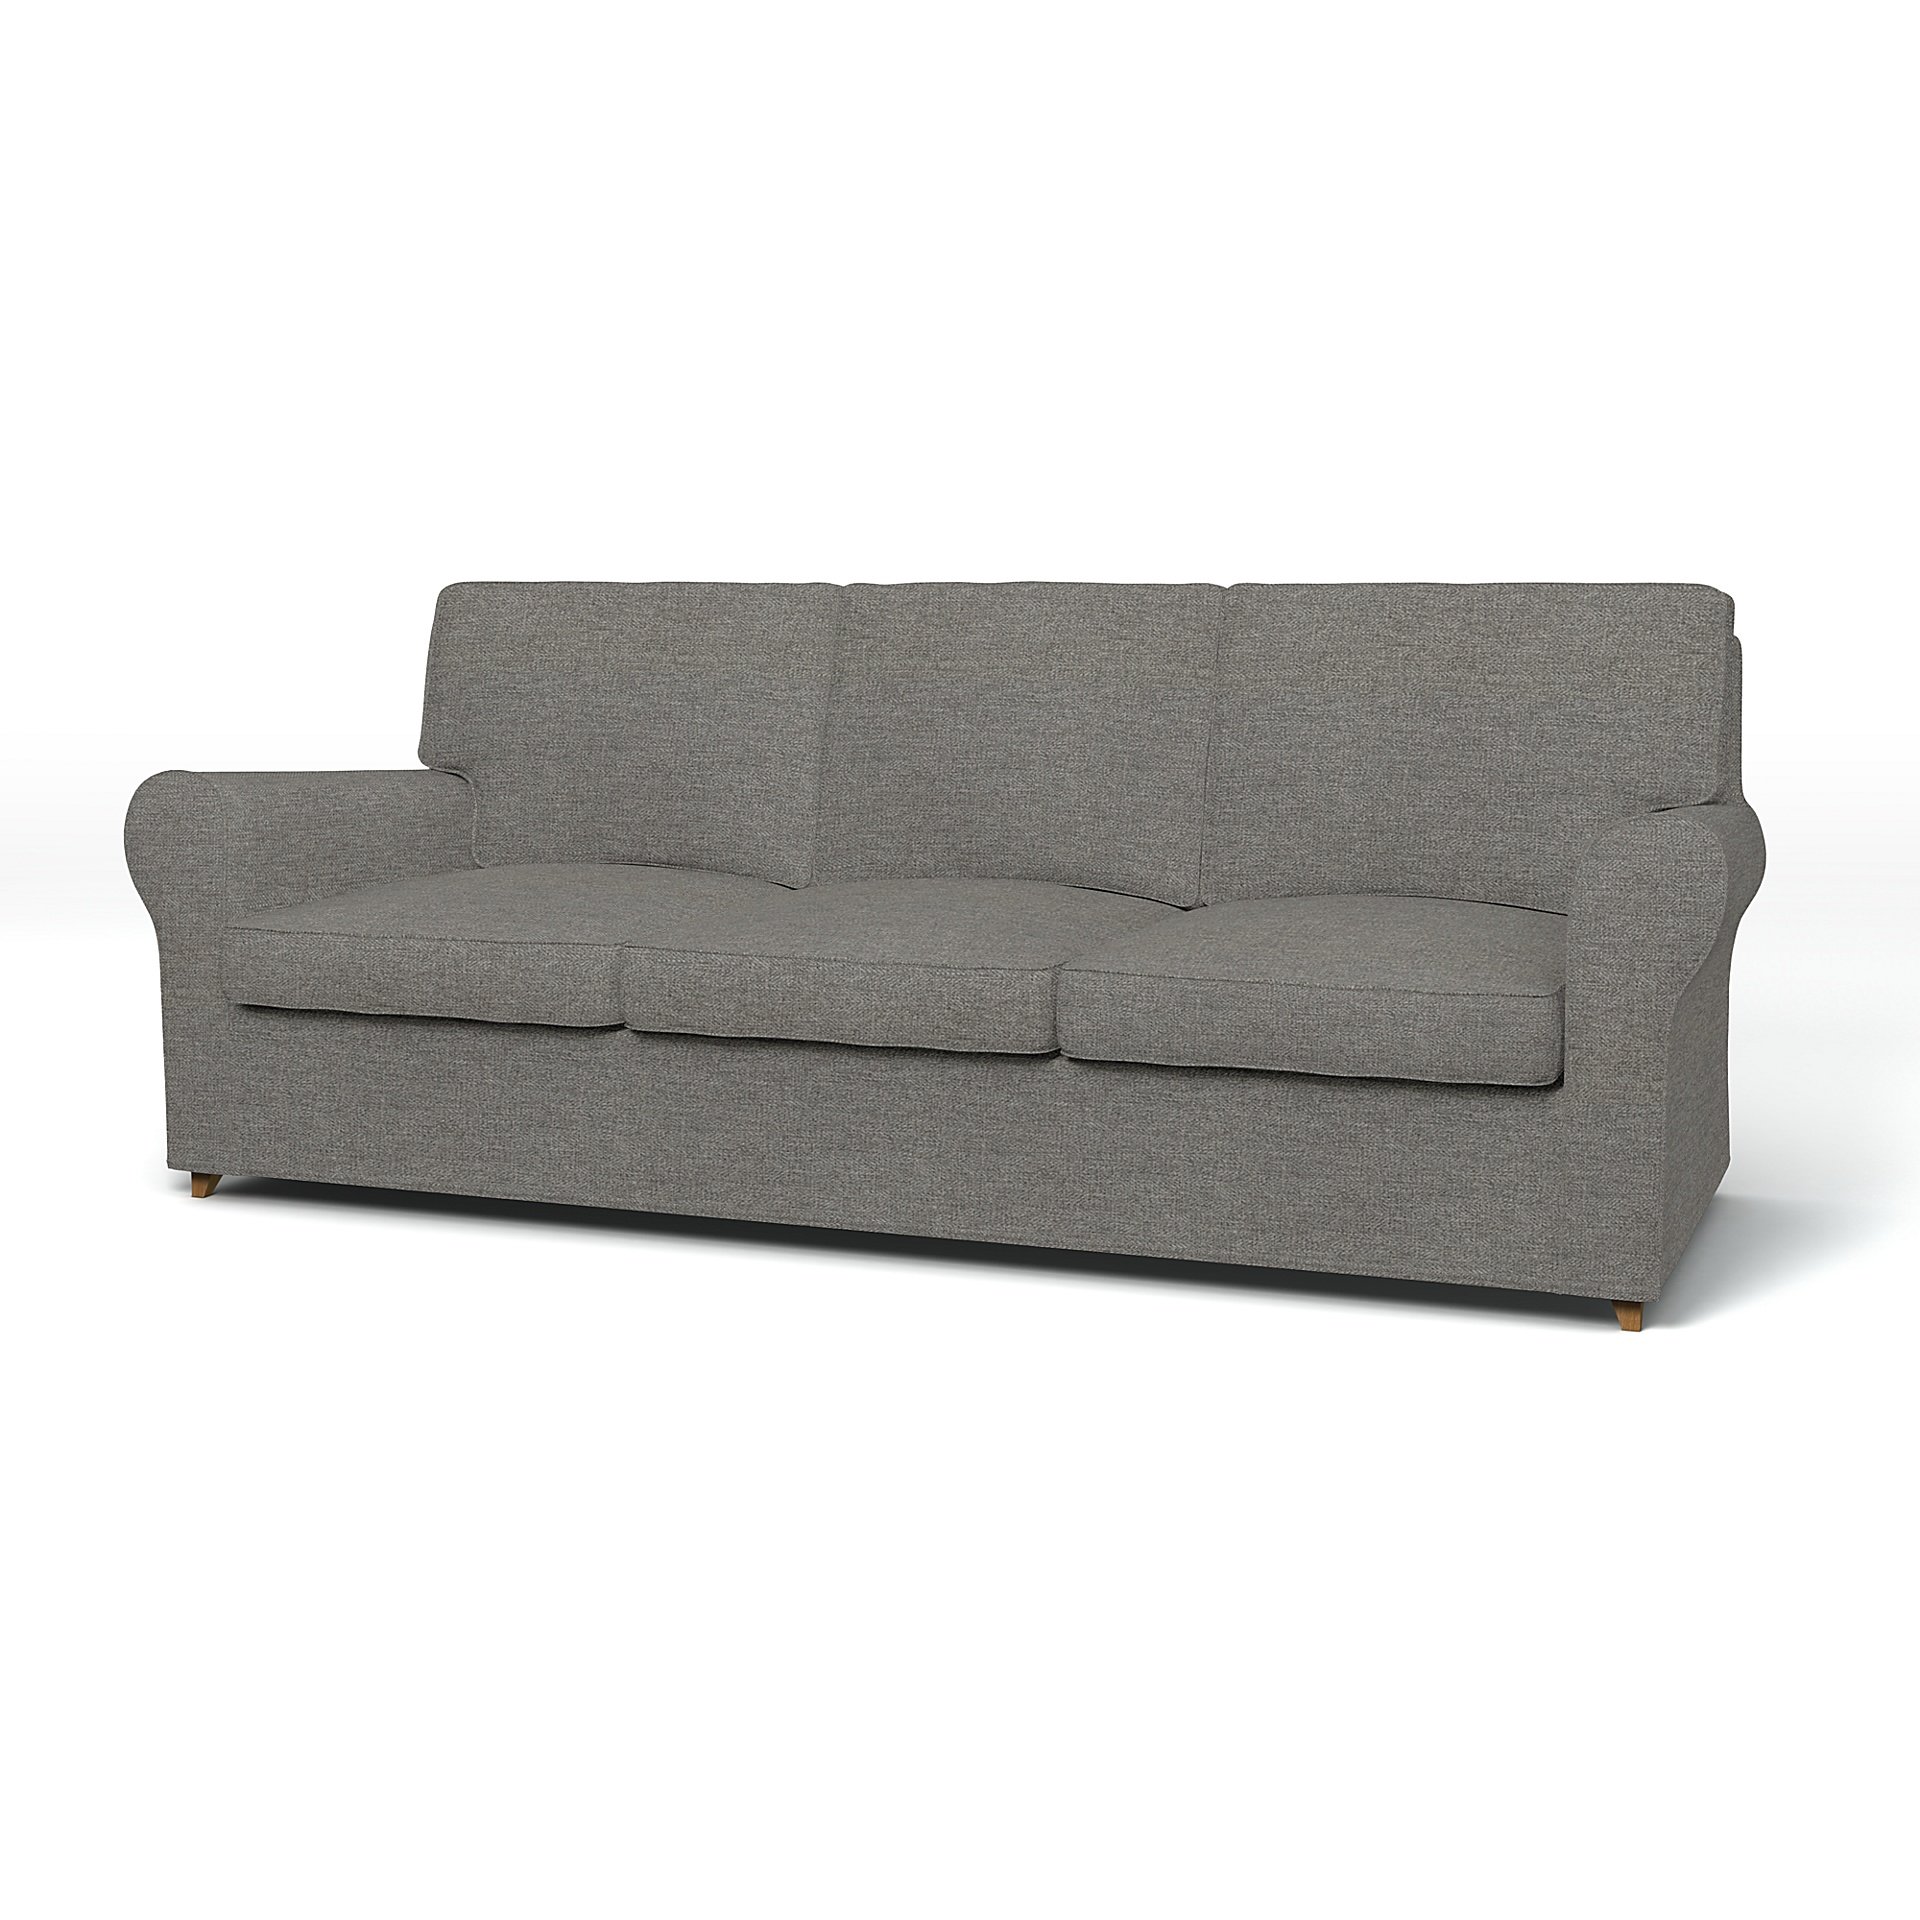 IKEA - Angby 3 Seater Sofa Cover, Taupe, Boucle & Texture - Bemz